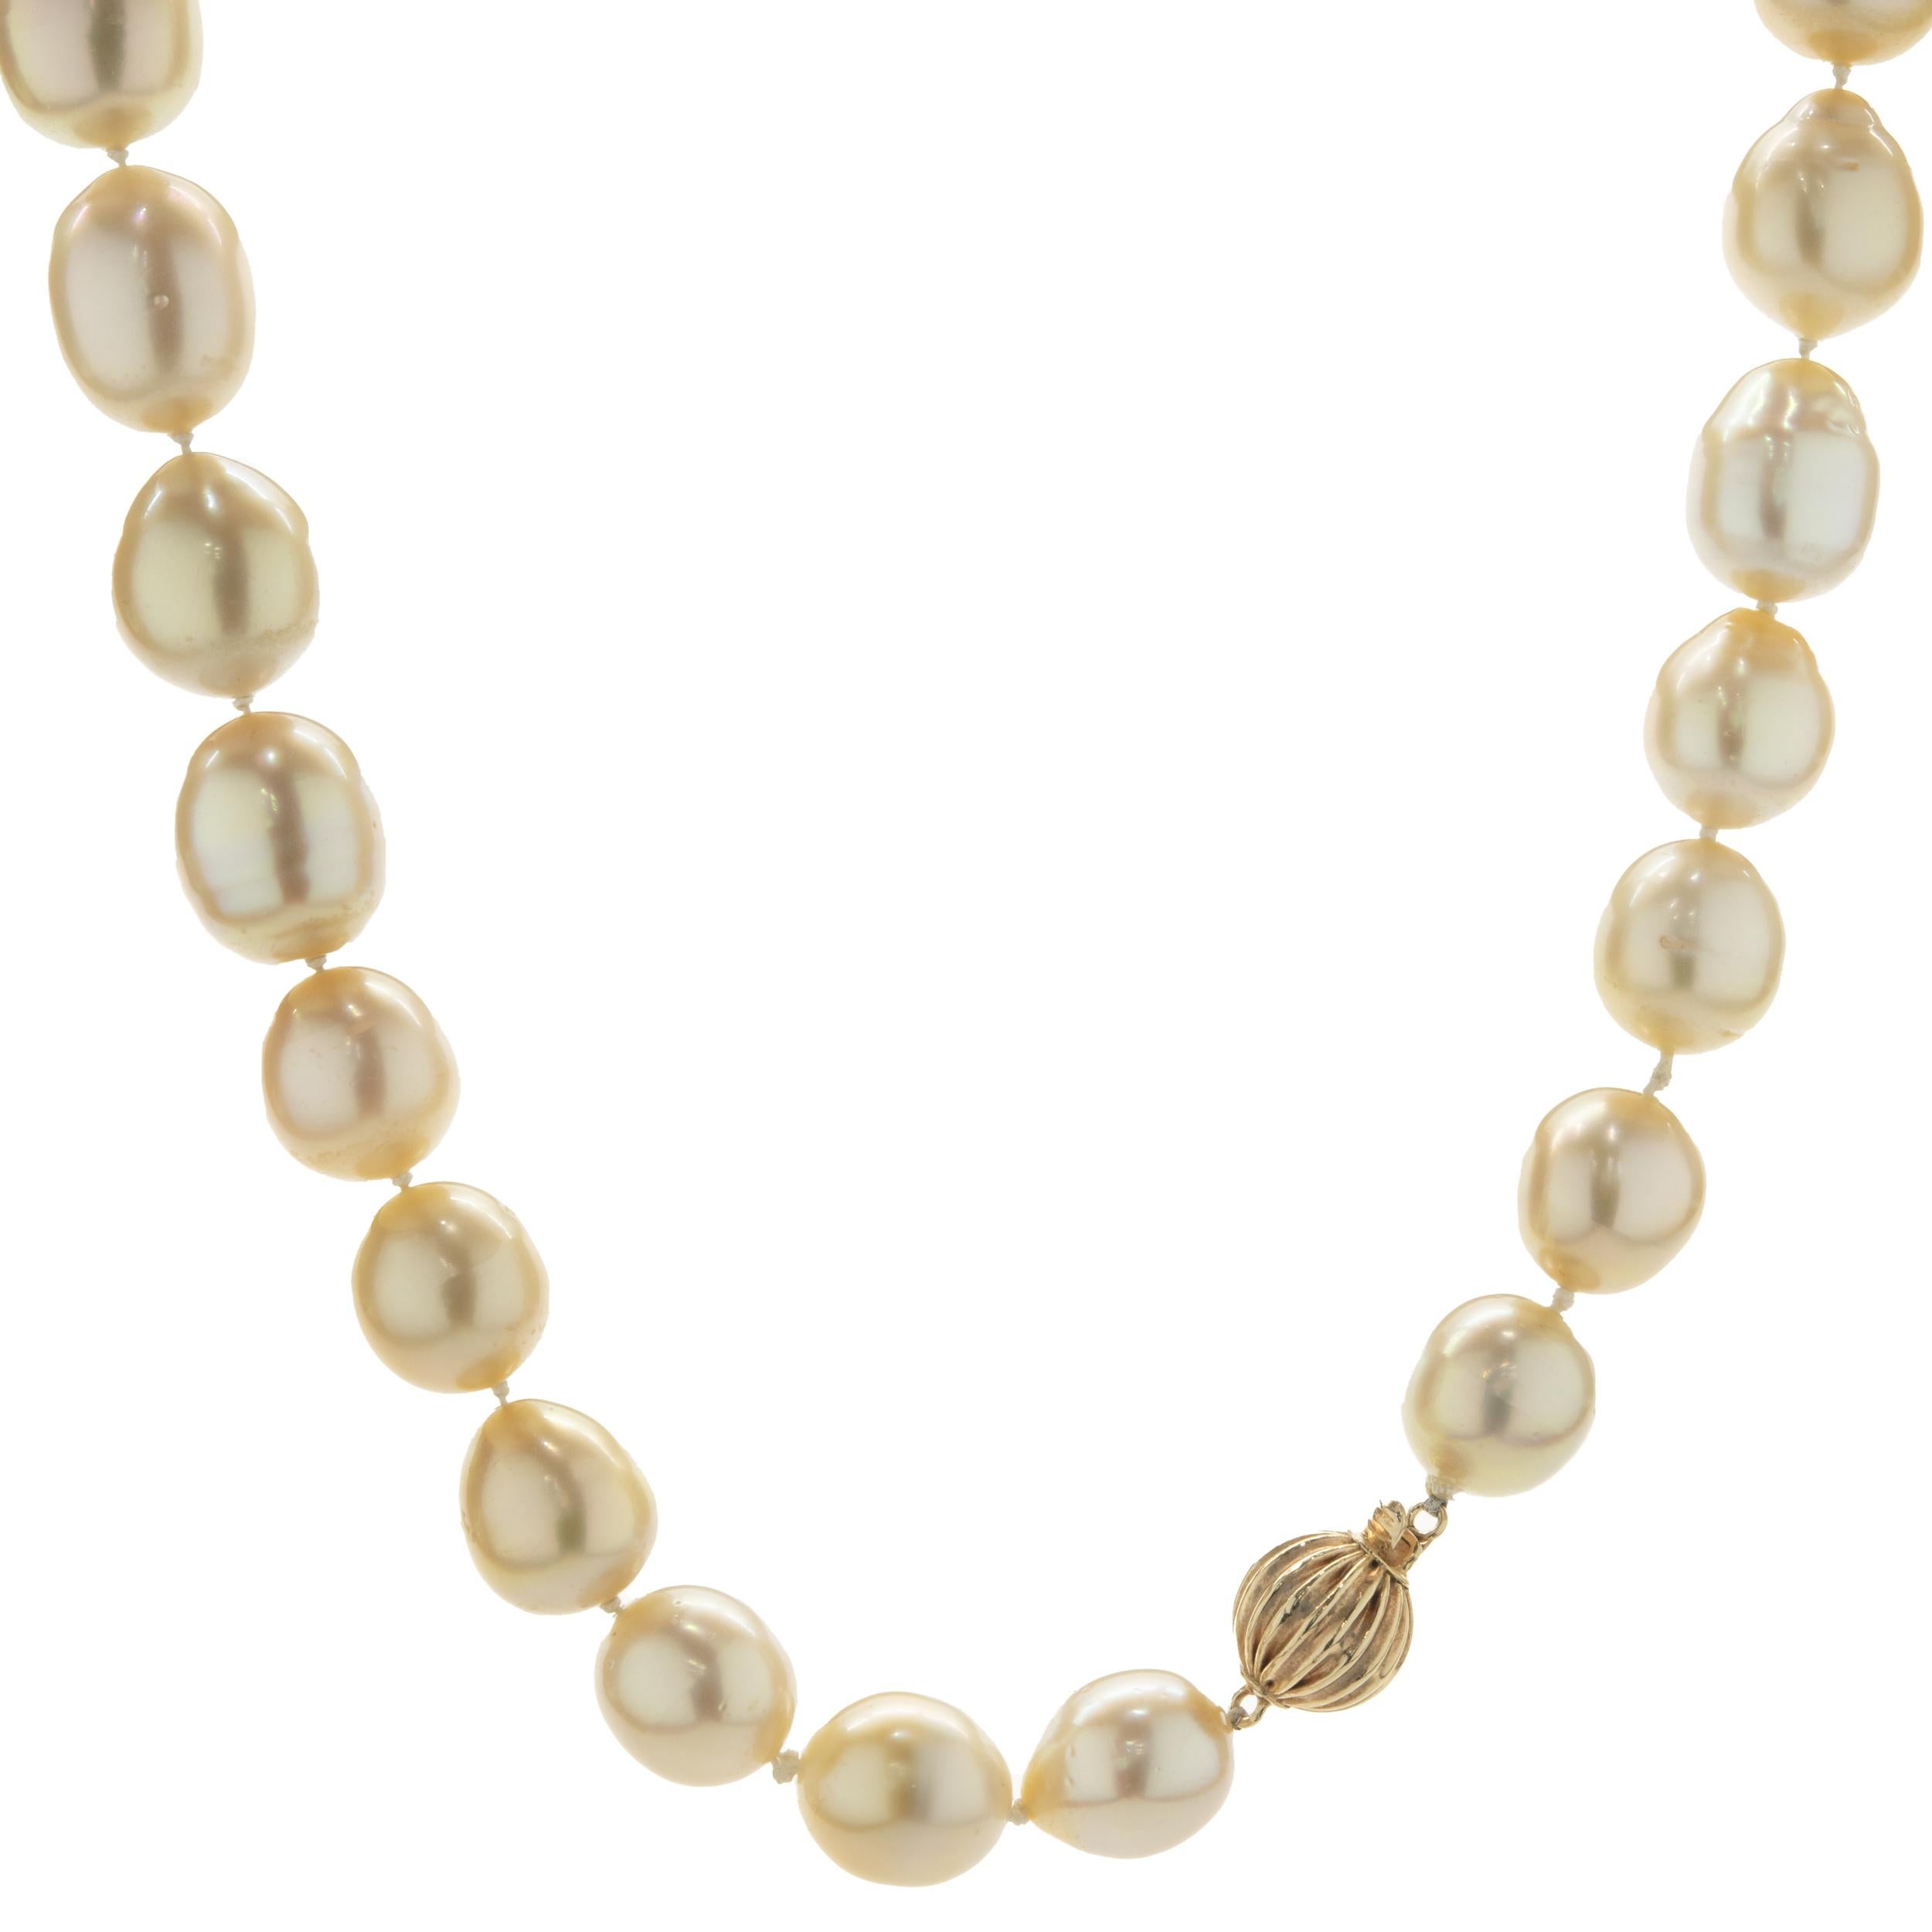 Round Cut Golden Pearl Necklace with 14 Karat Yellow Gold Ball Clasp For Sale